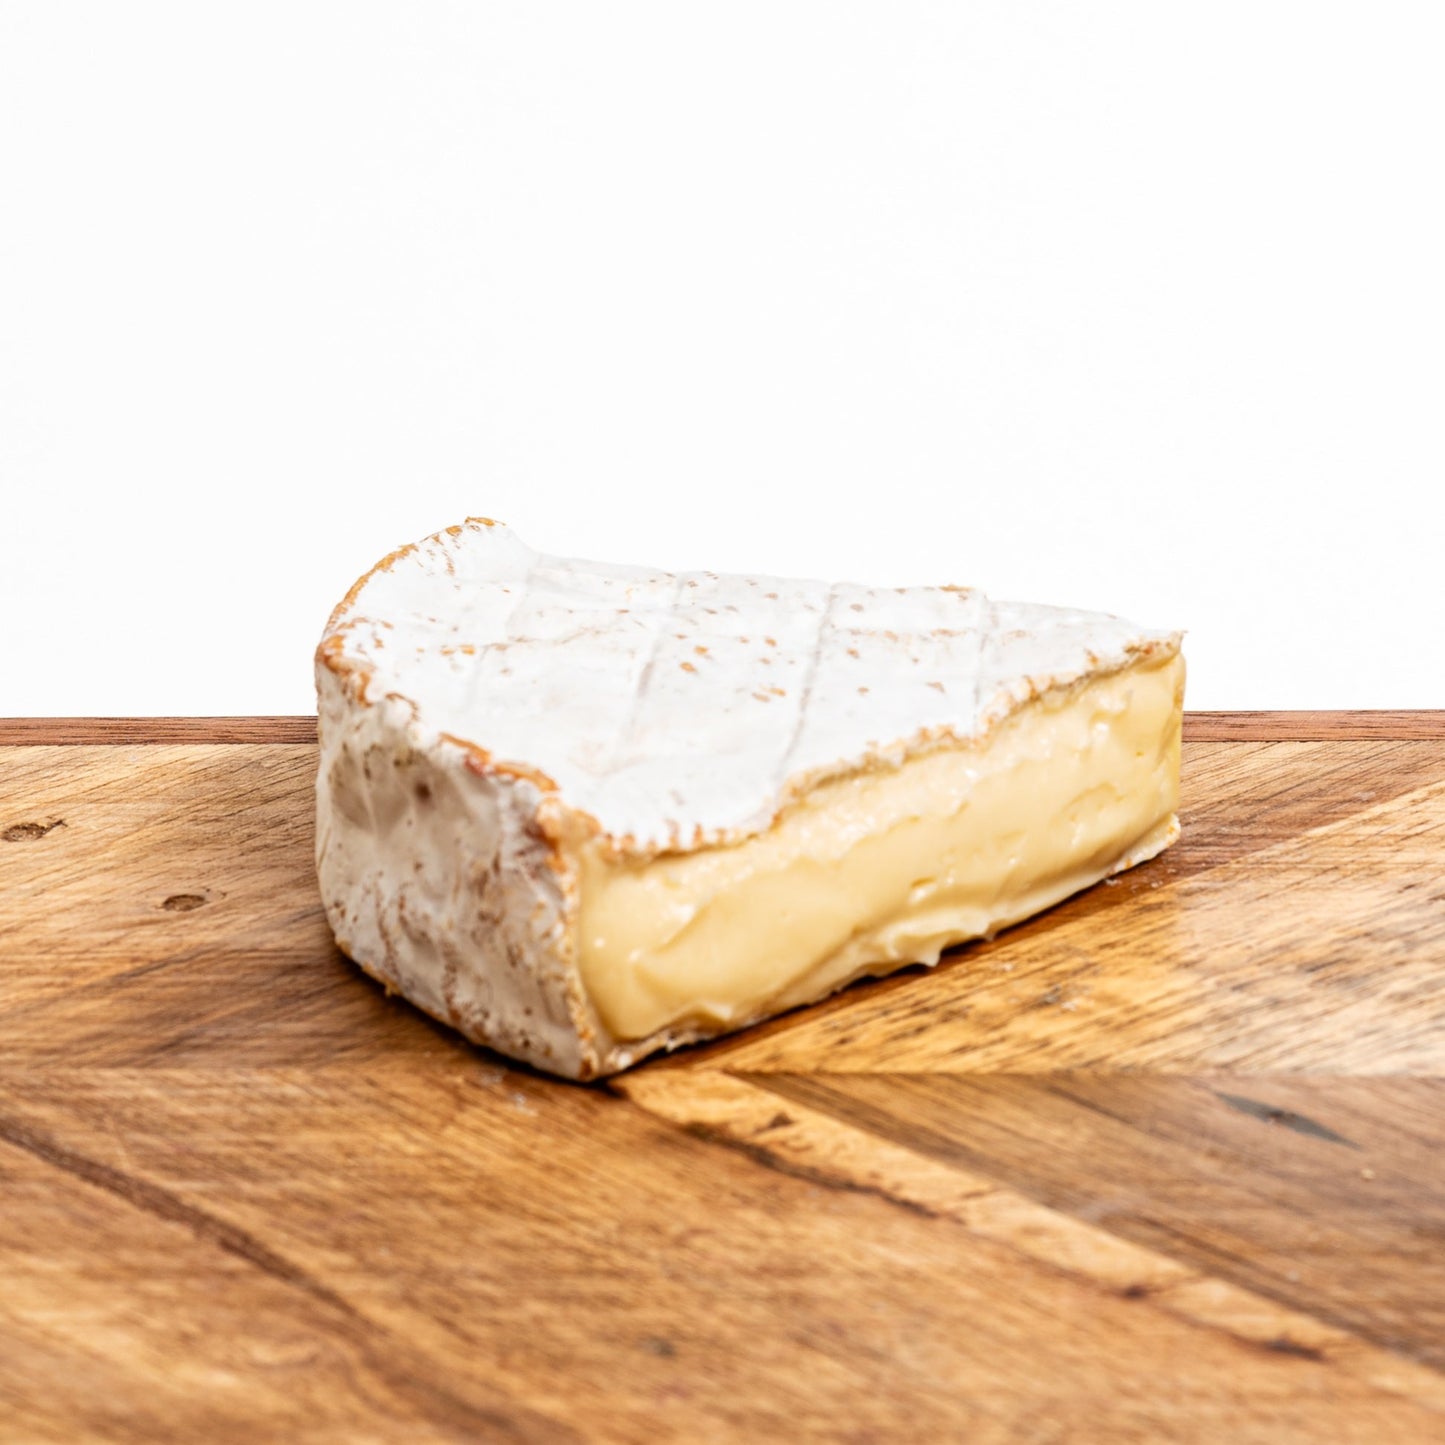 Northern Brie